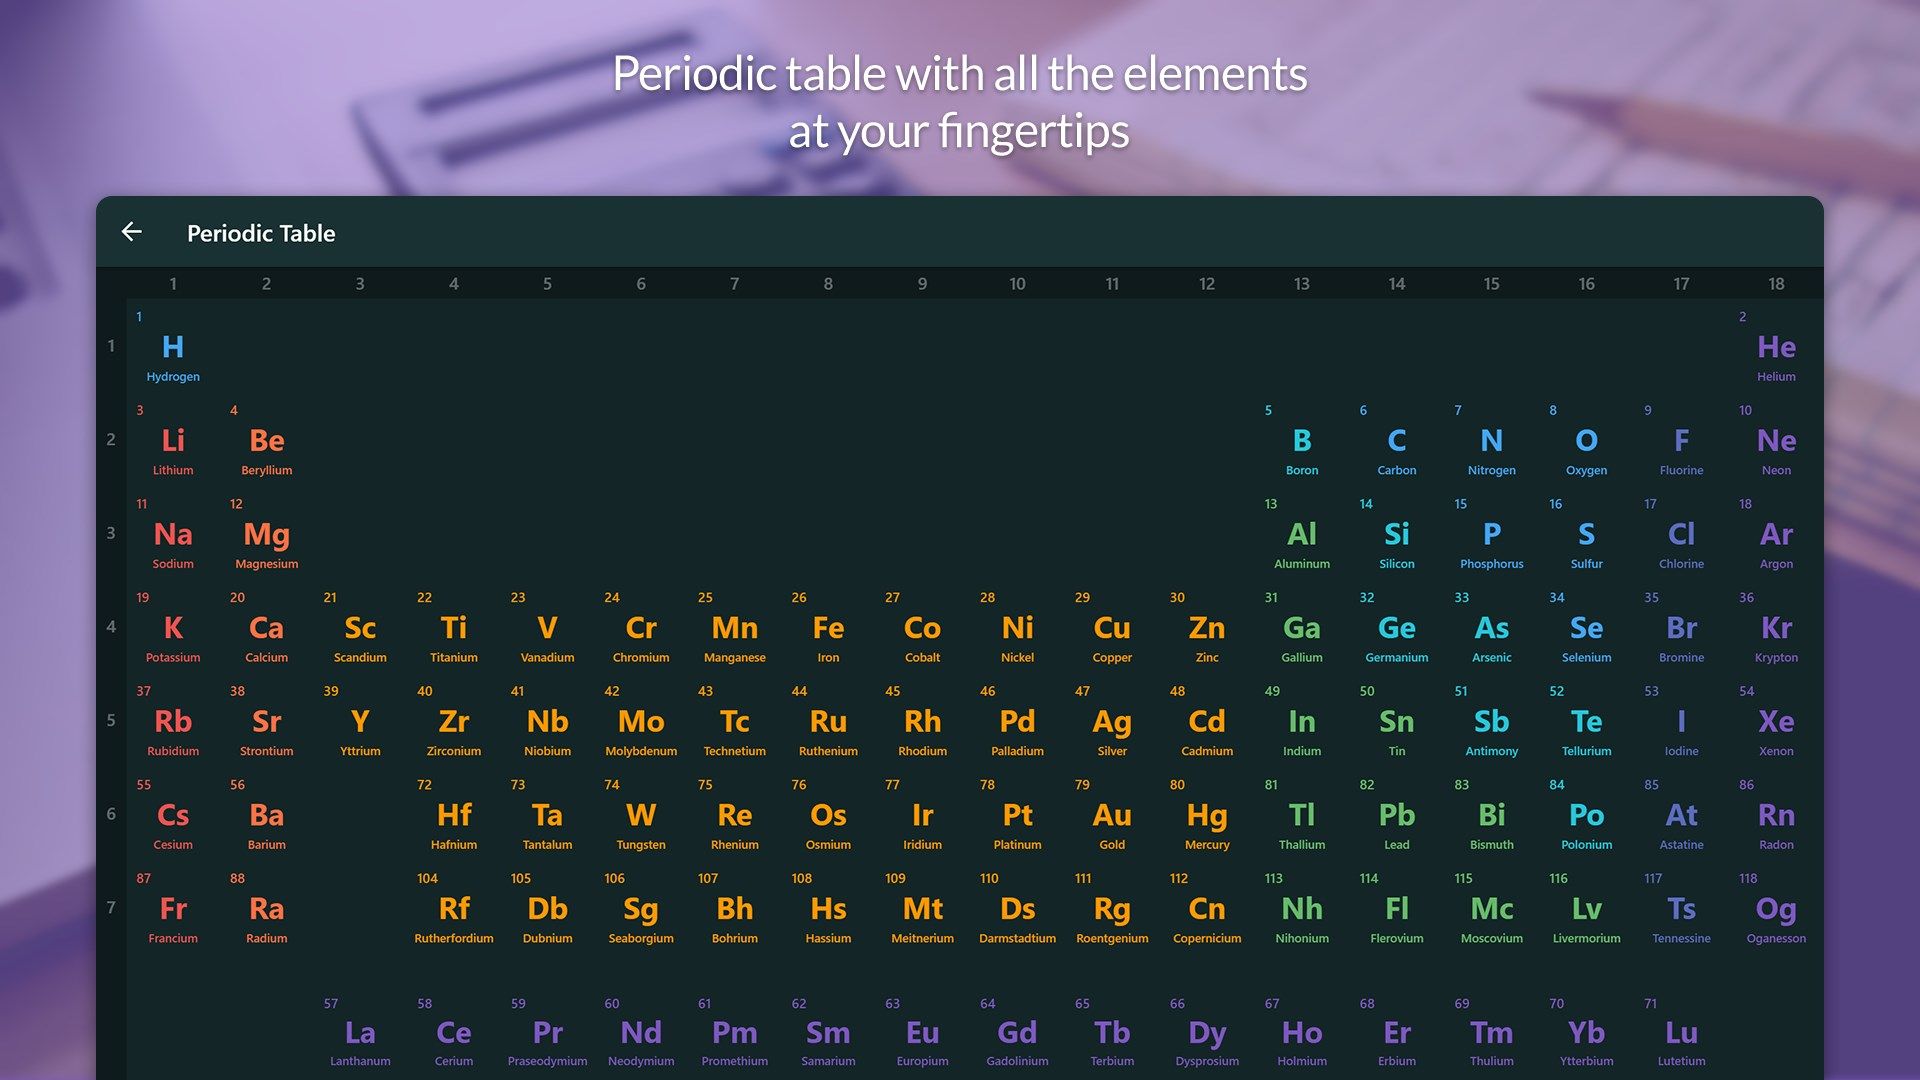 Periodic table with all the elements at your fingertips